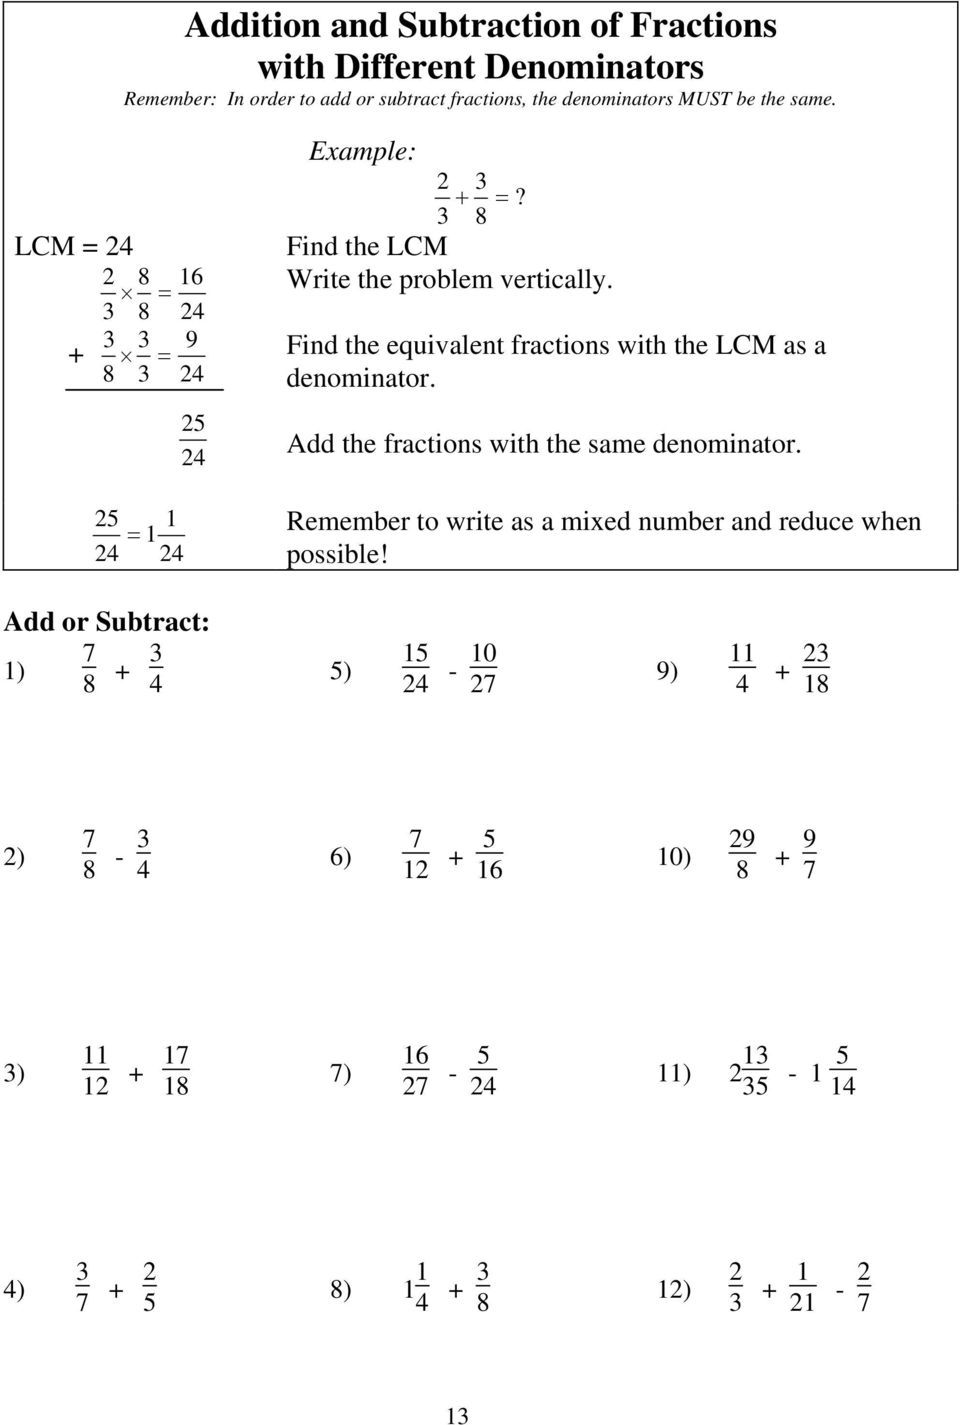 Find the equivalent fractions with the LCM as a denominator. Add the fractions with the same denominator.